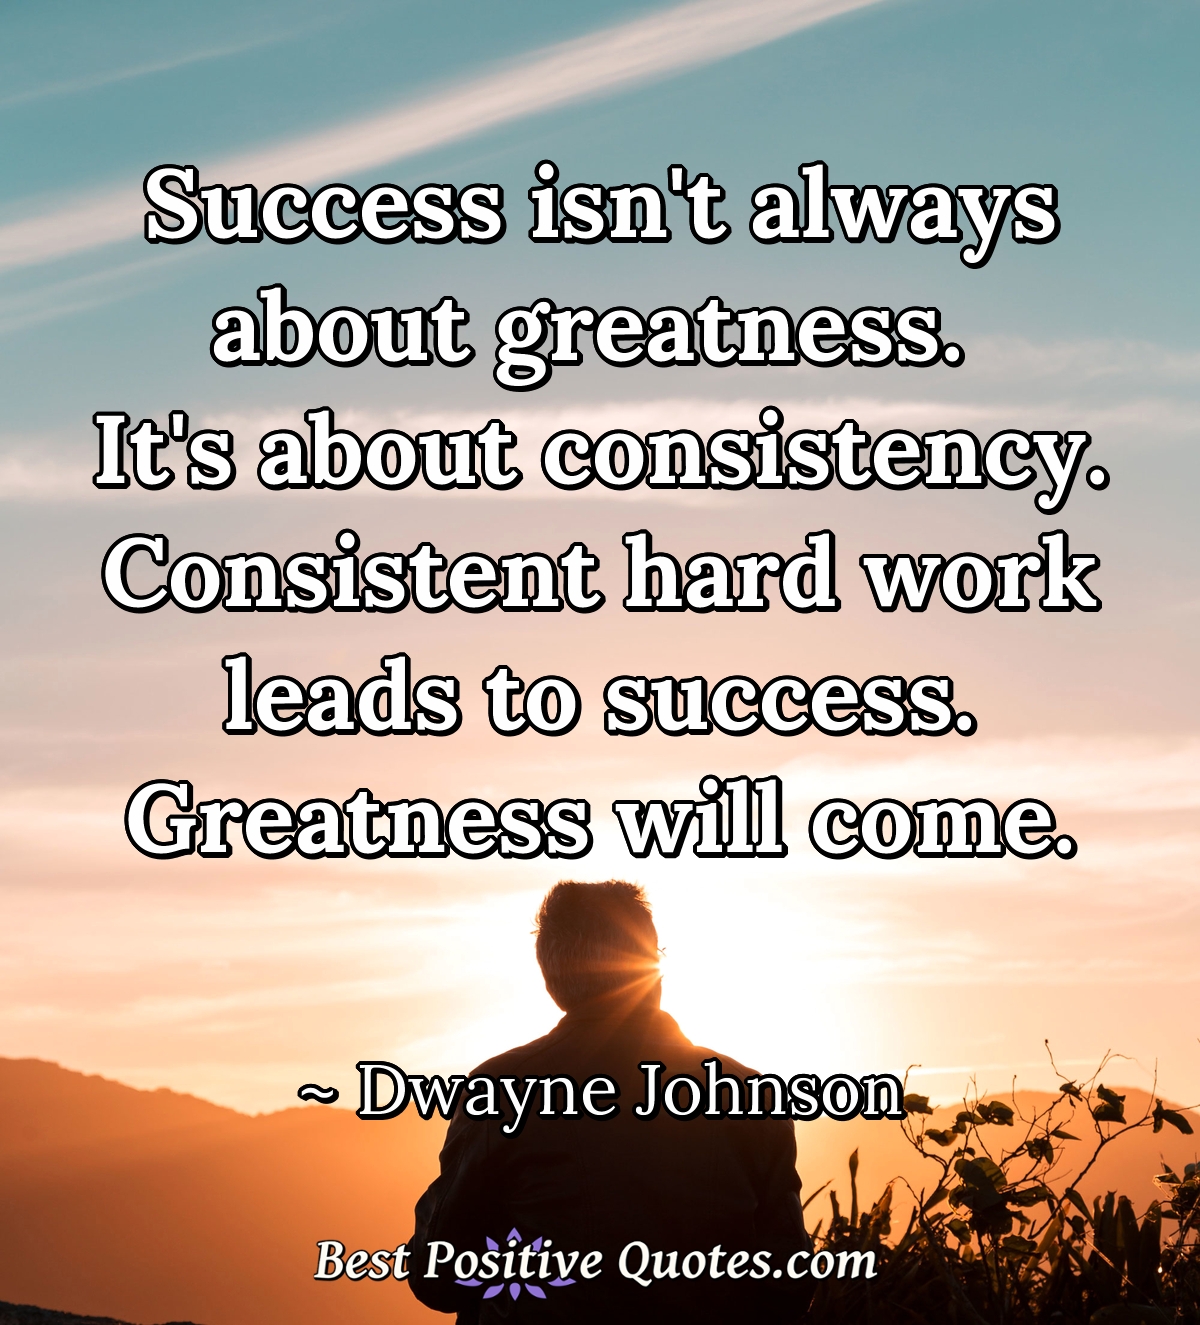 Success isn't always about greatness. It's about consistency. Consistent hard work leads to success. Greatness will come. - Dwayne Johnson